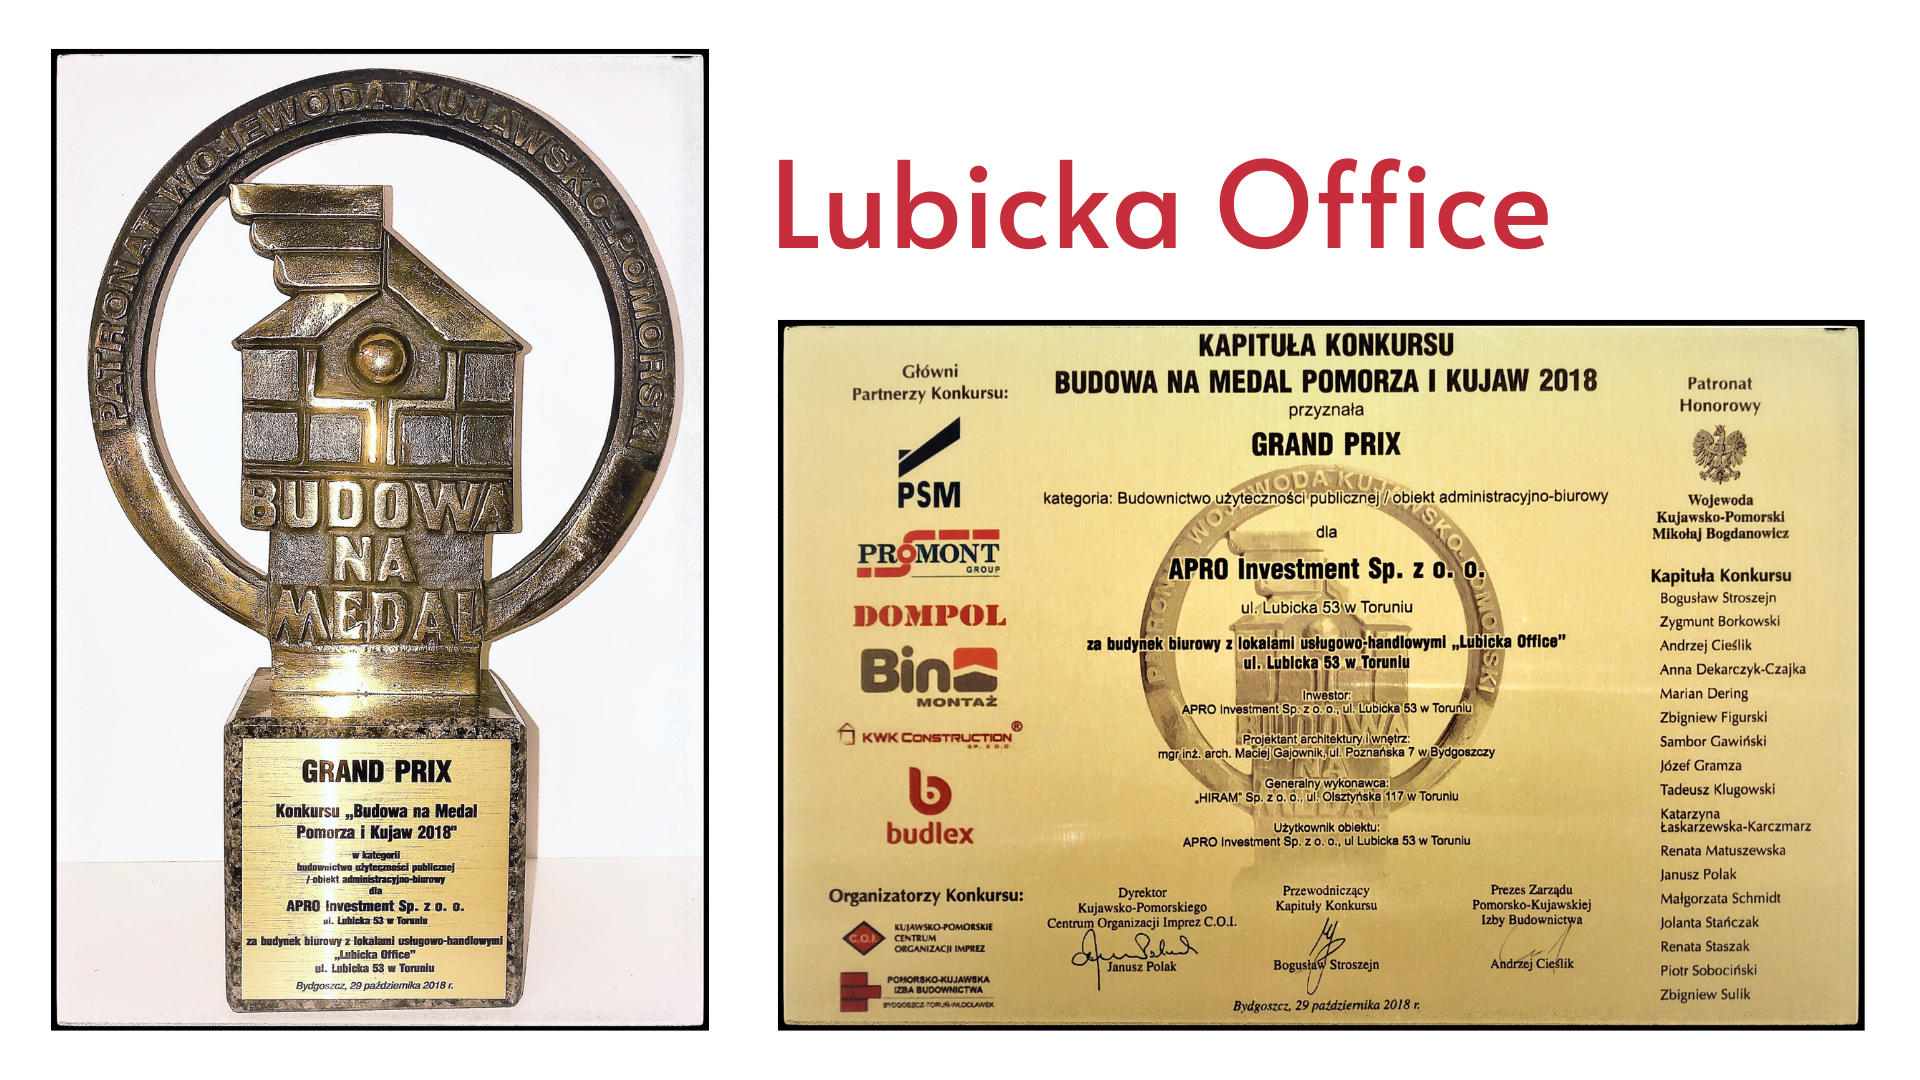 Lubicka Office Apro Investment